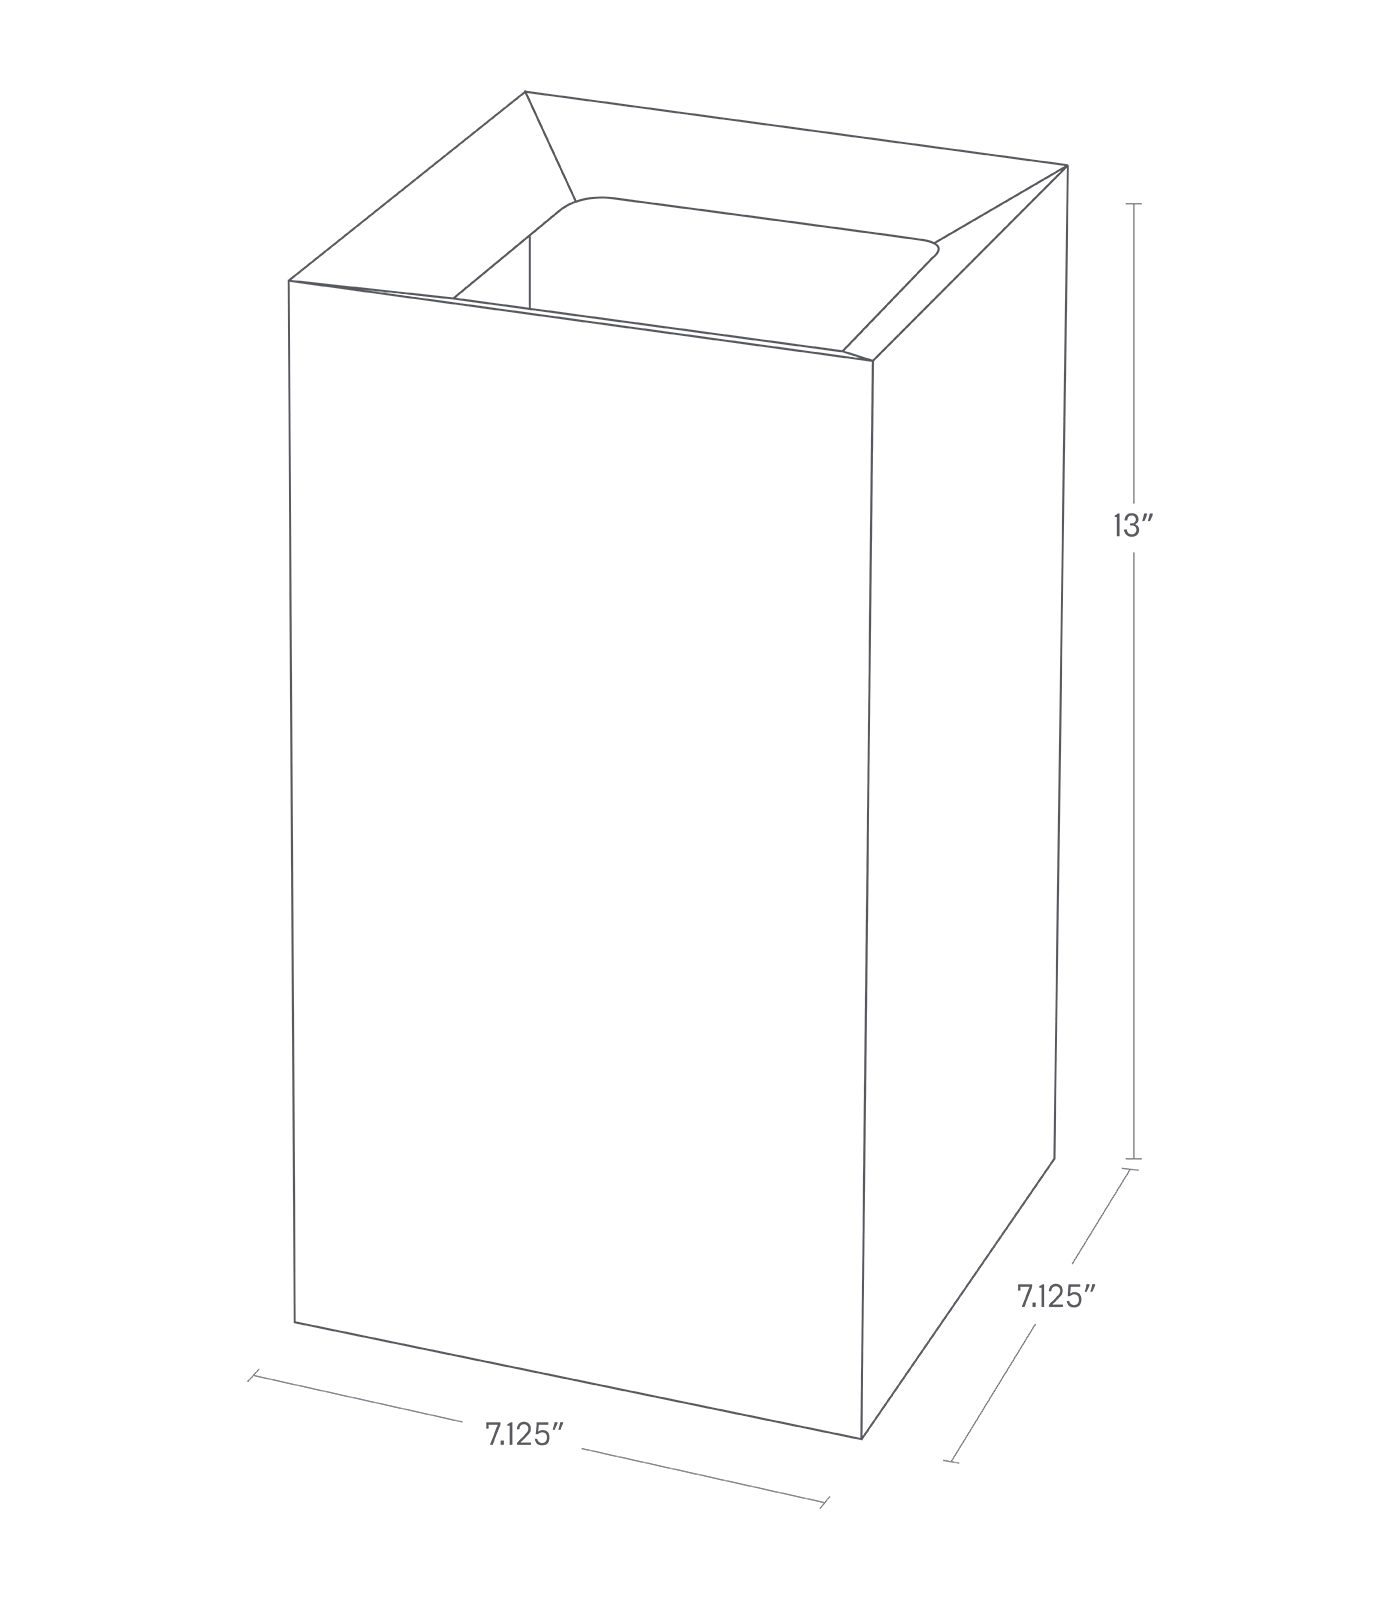 Dimension image for Trash Can showing a total height of 13